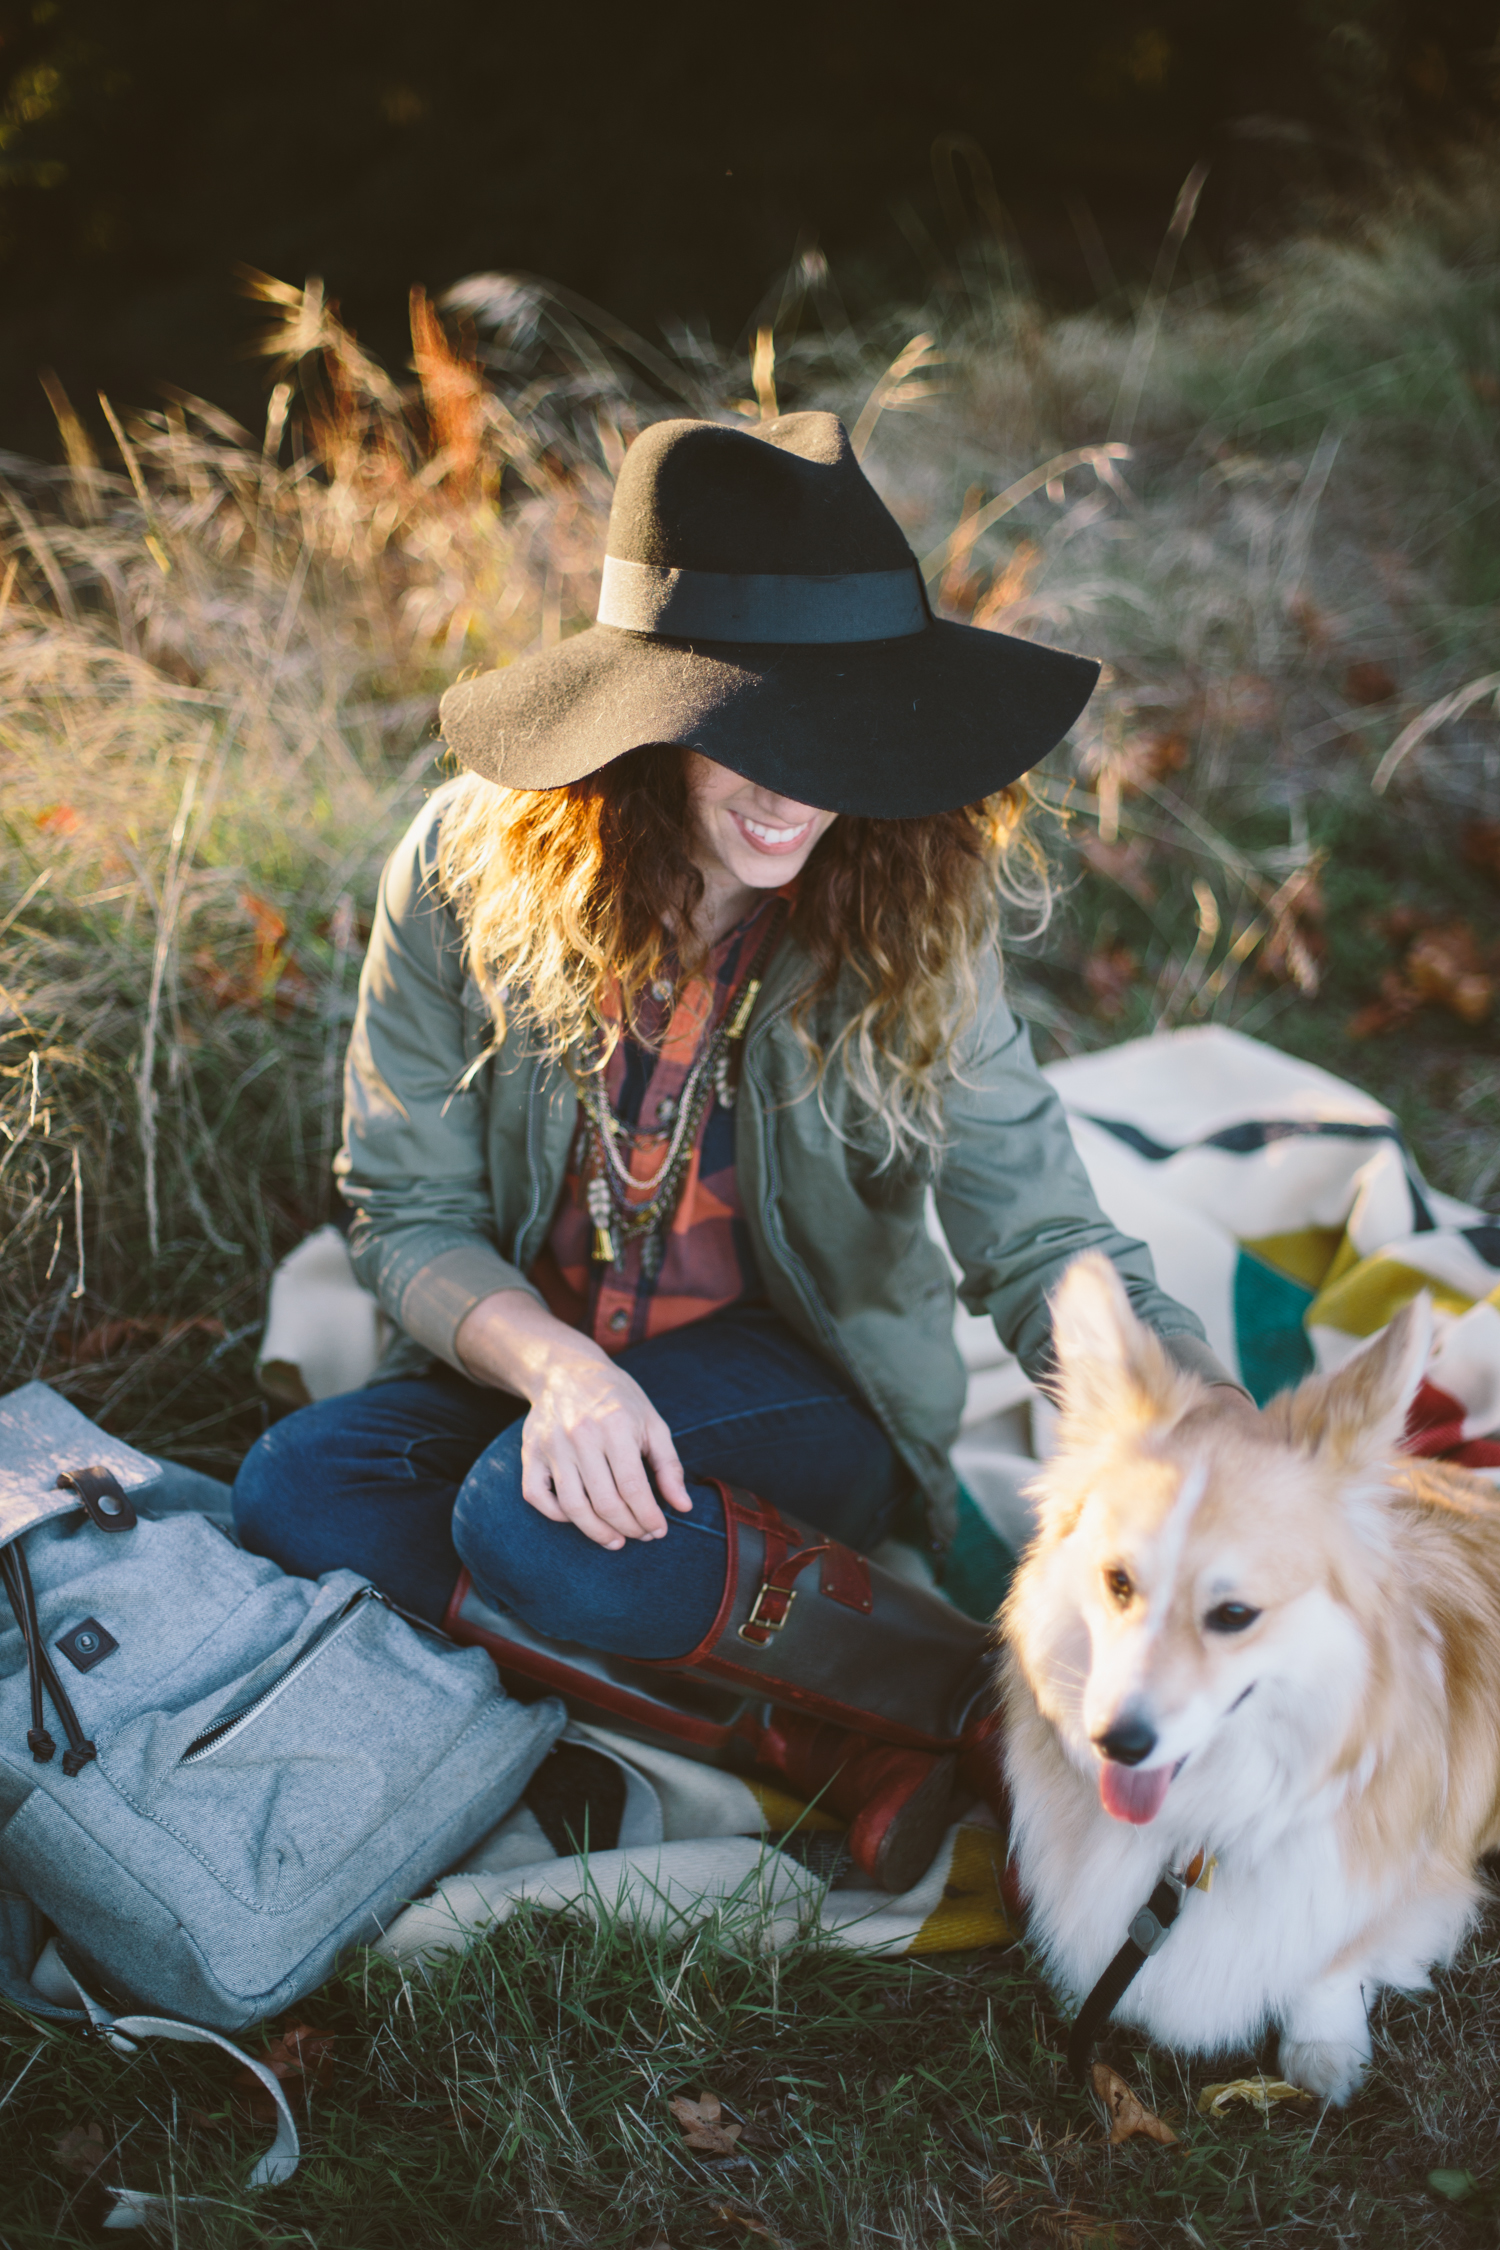 Pacific Northwest Fall Outfit | Liz Morrow Studios